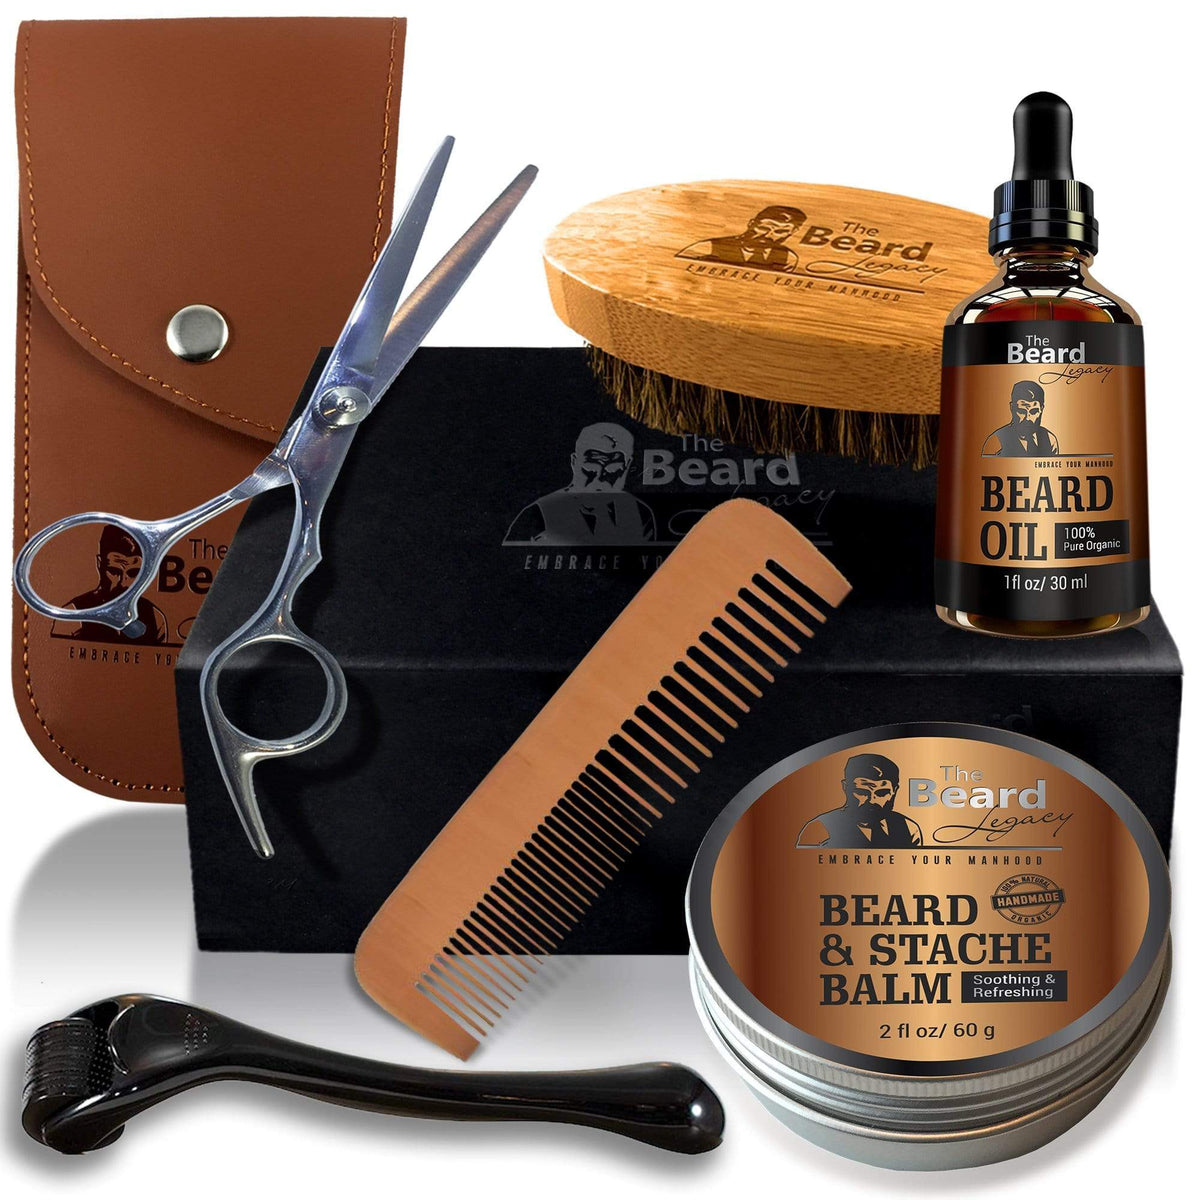 The Beard Legacy A Complete Beard Grooming Kit For Men 3333